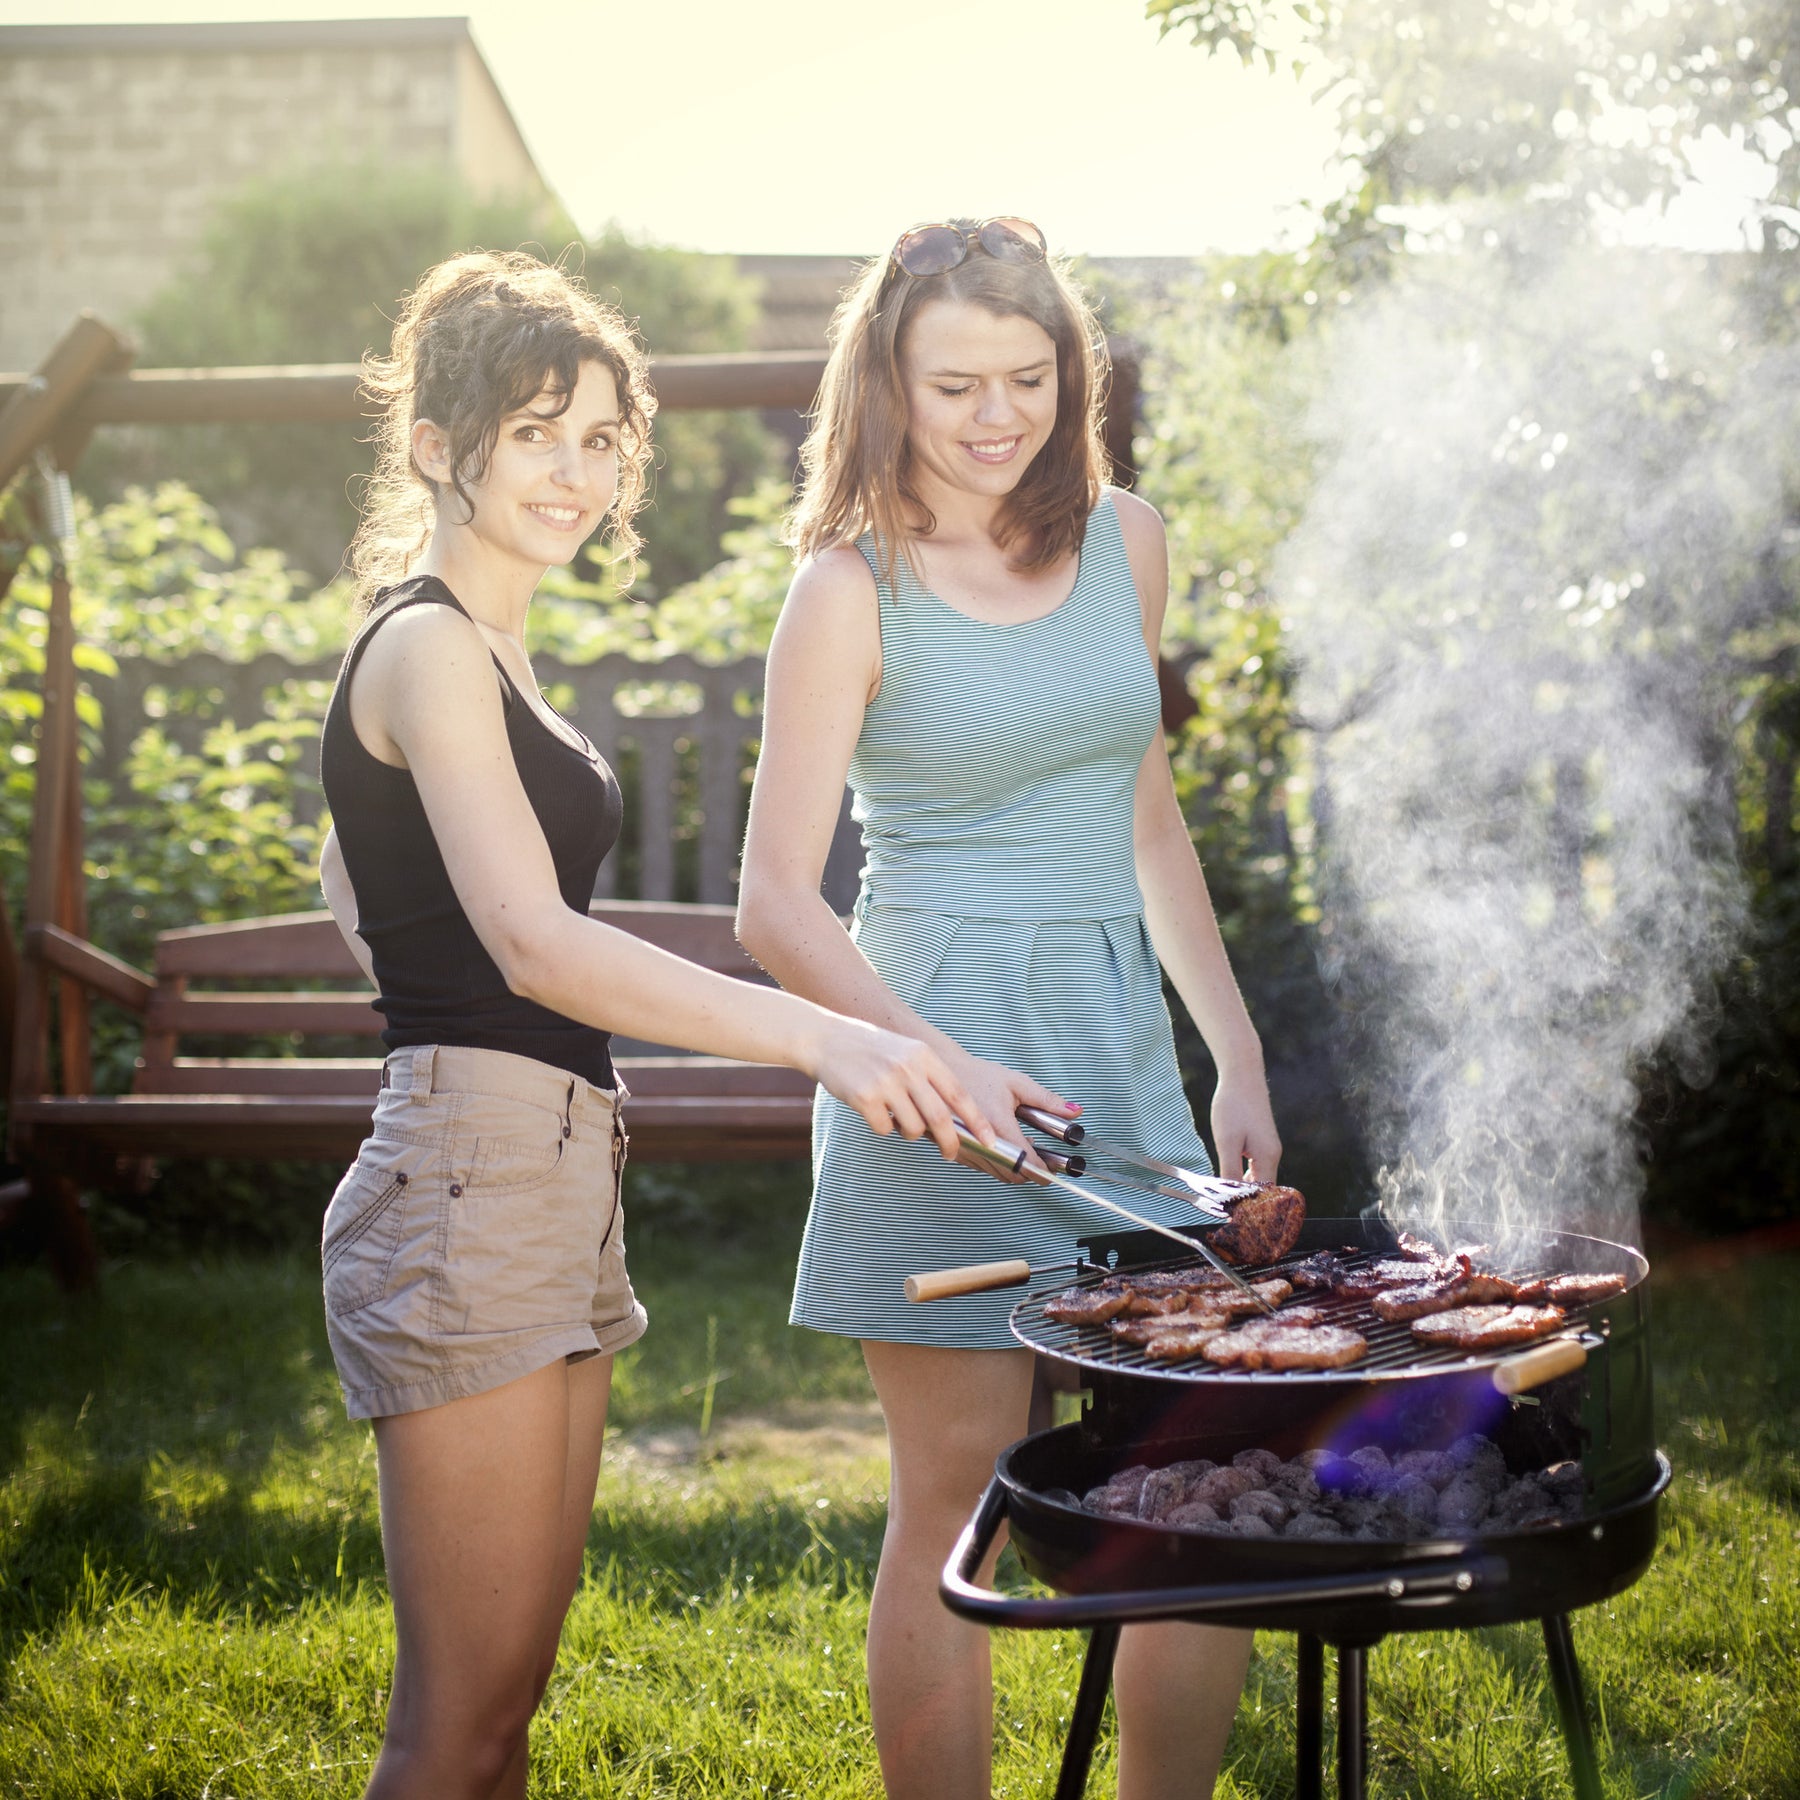 5 Healthy Picks to Liven Up Your BBQ!